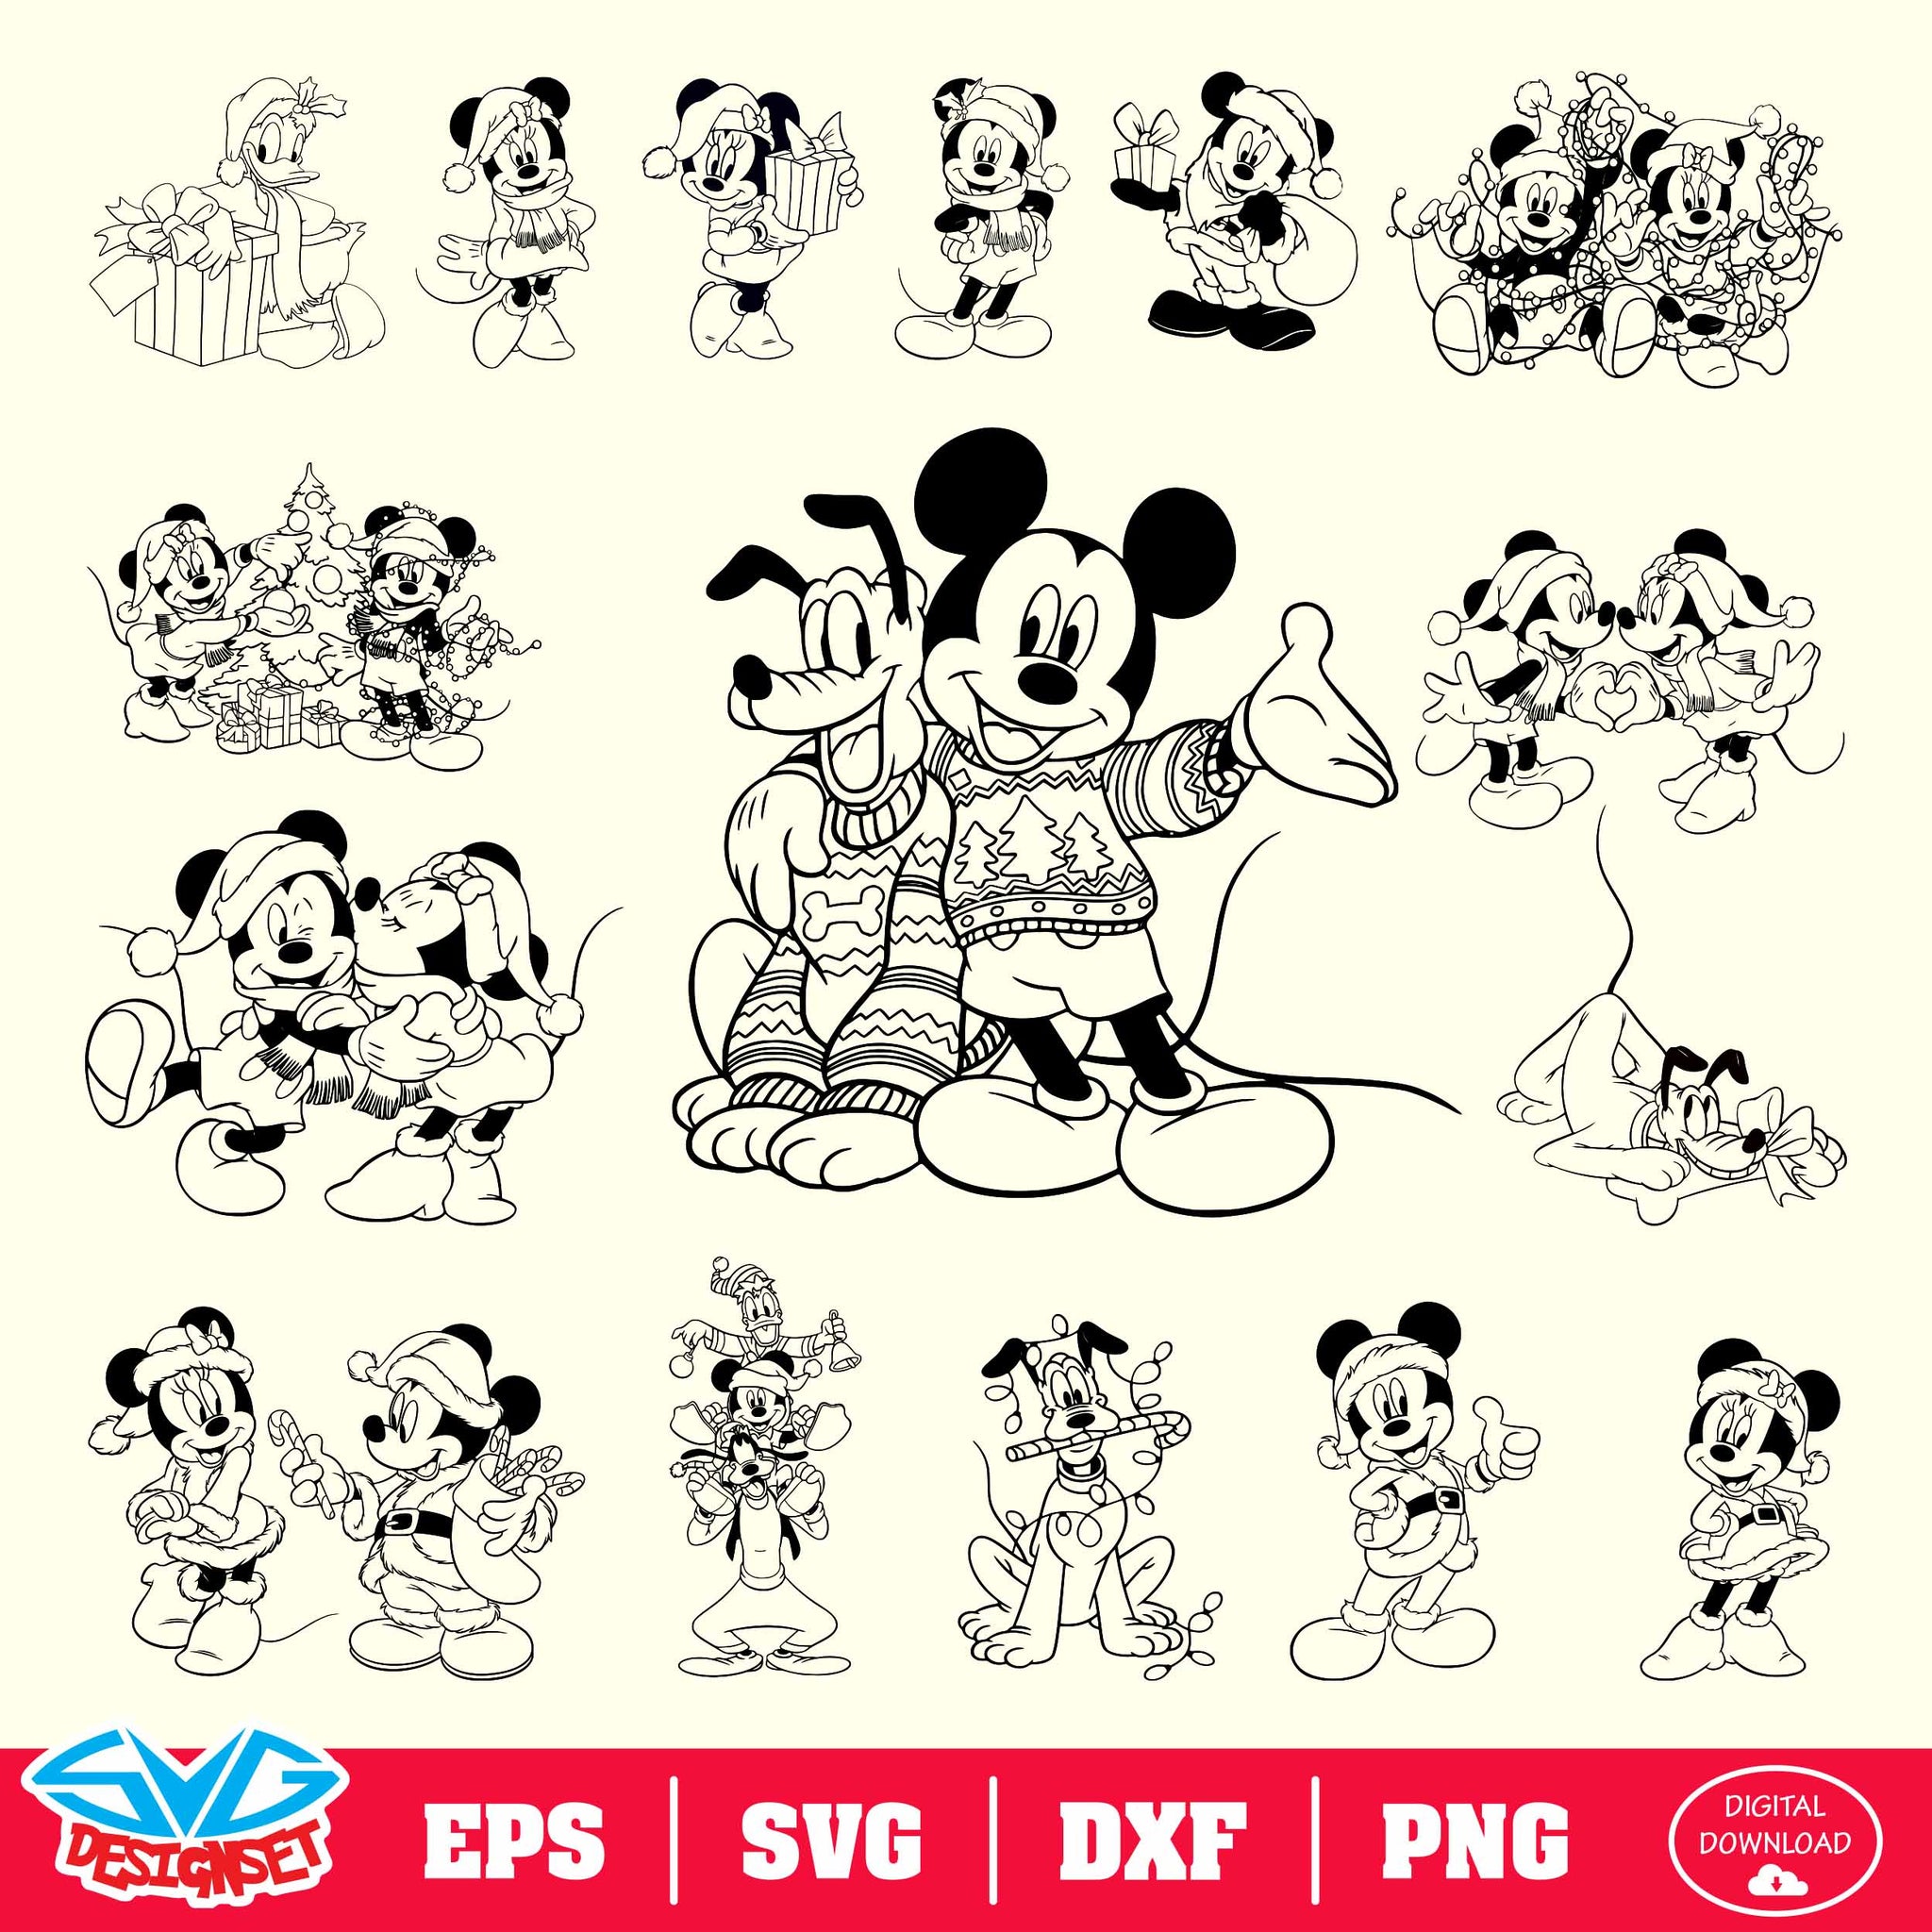 Disney Christmas Bundle Svg, Dxf, Eps, Png, Clipart, Silhouette and Cutfiles #002 - SVGDesignSets